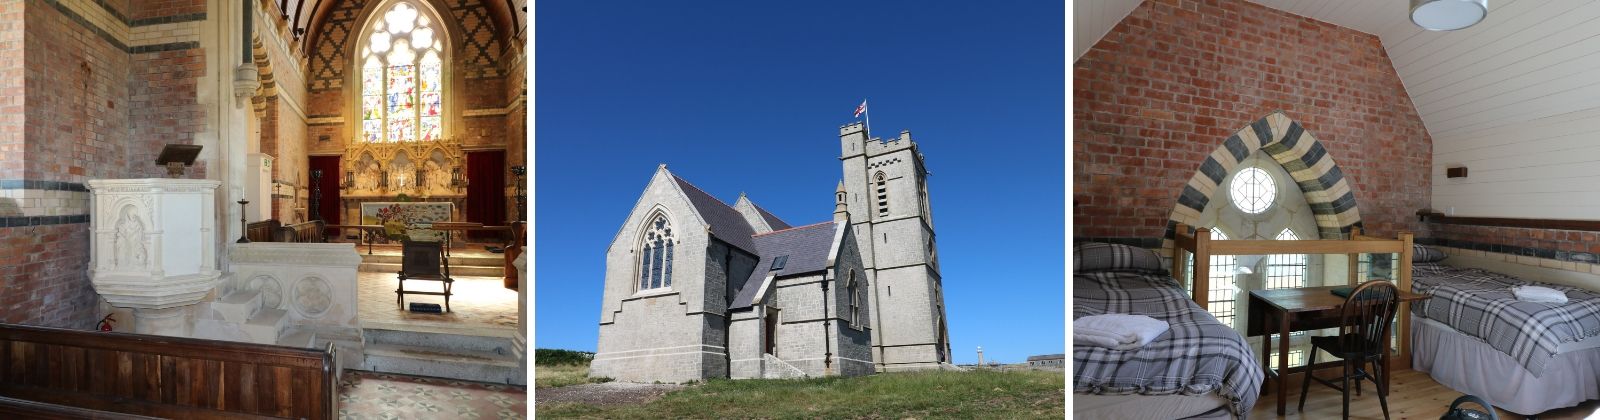 St Helen’s Church wins Heritage Project of the Year at the 2019 Michelmores Property Awards